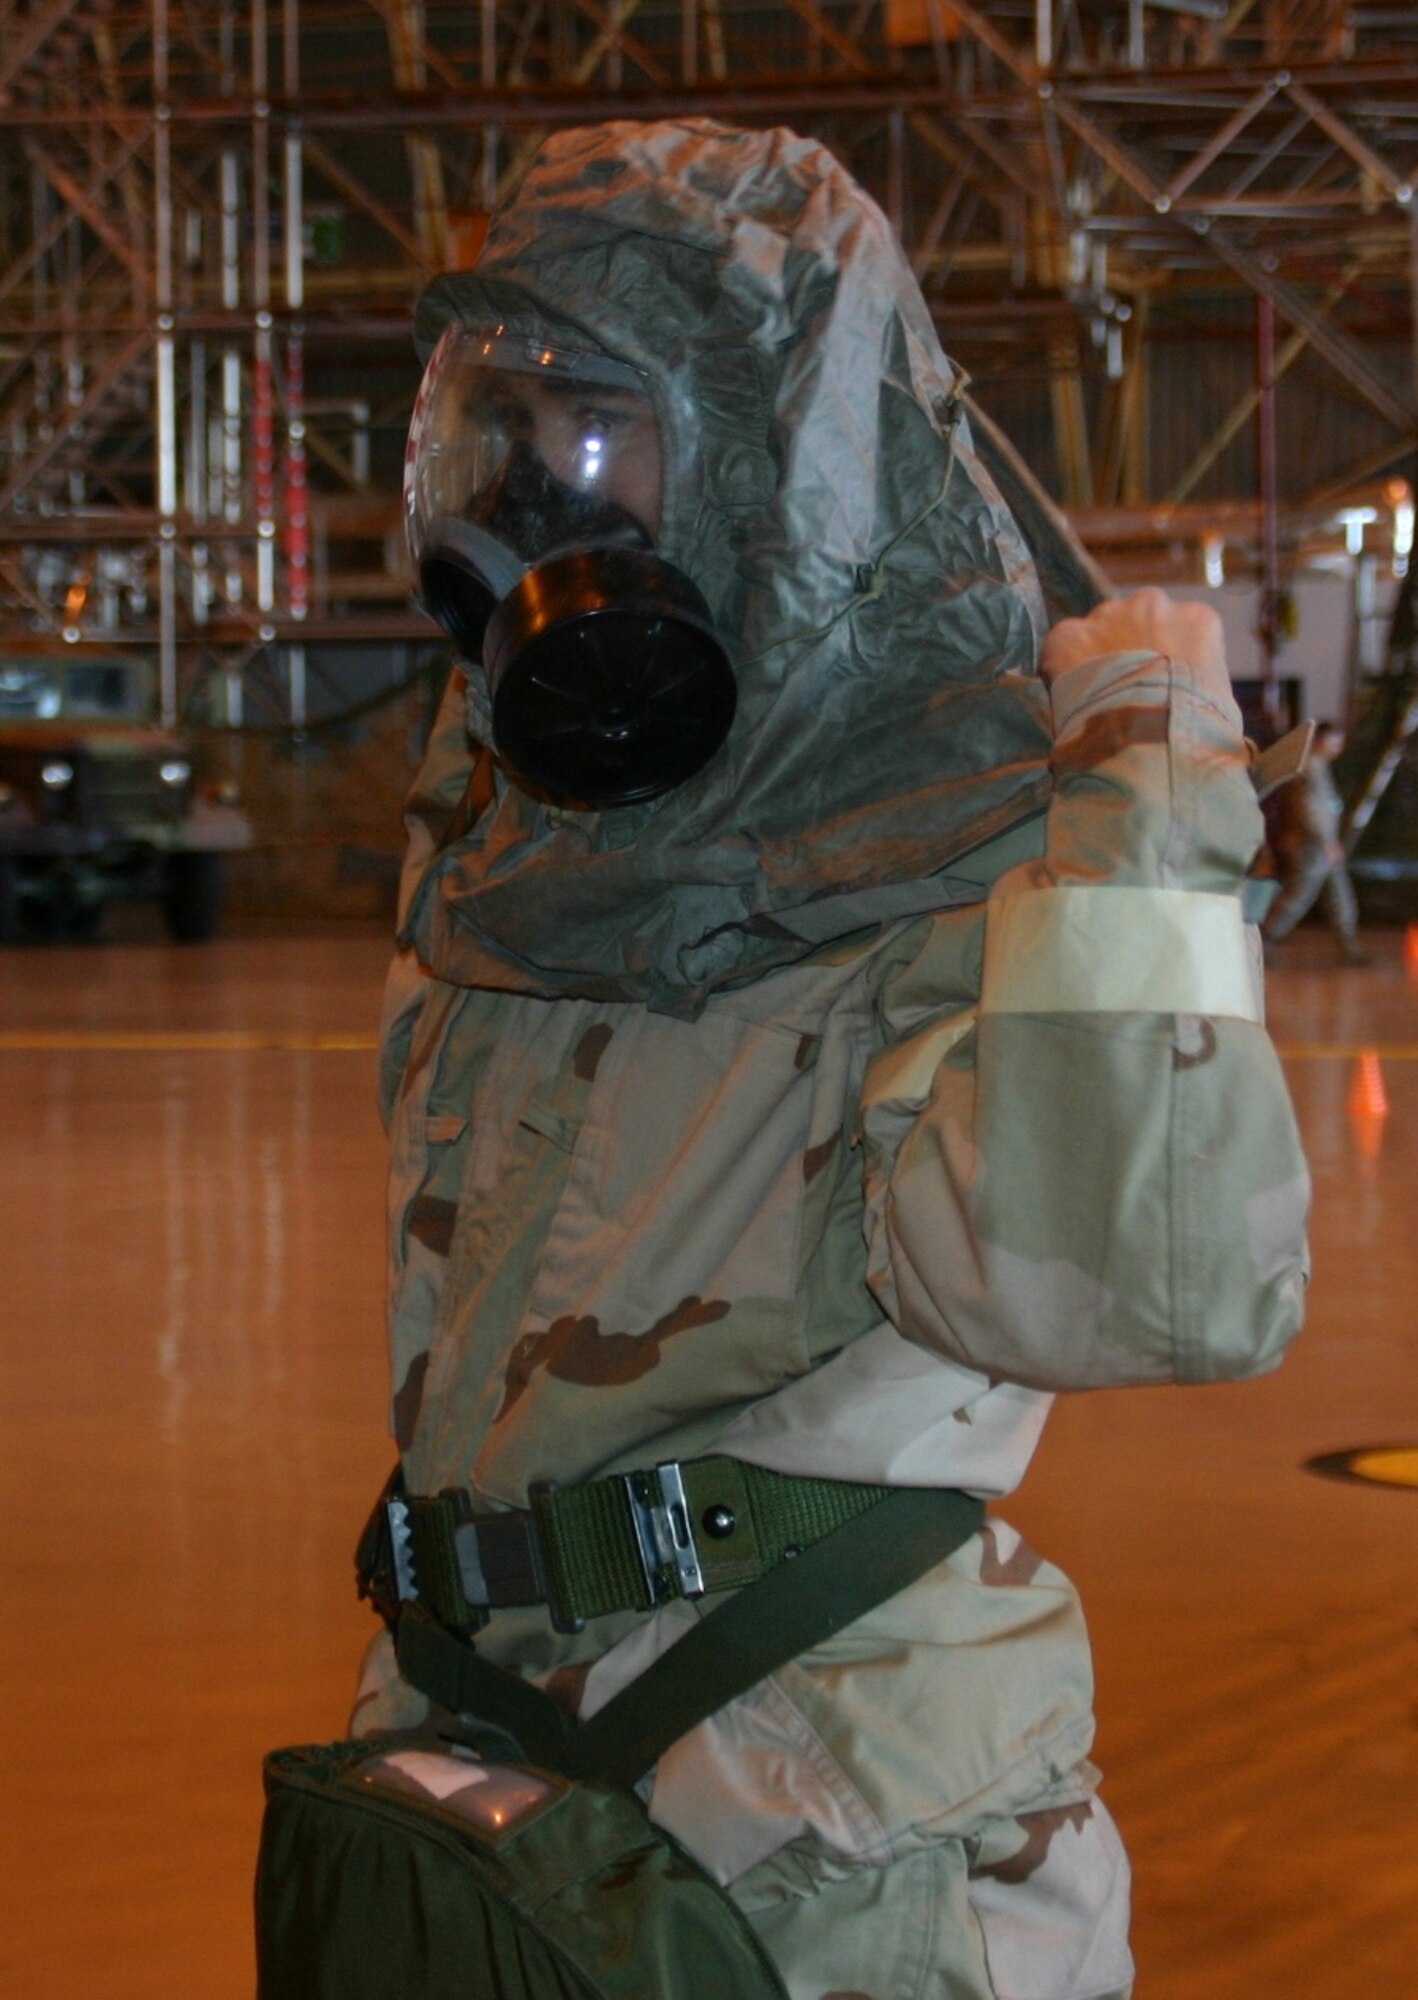 An Airman makes the final gas mask adjustments before the Gas Mask ROE event at the ATSO Rodeo Jan. 30.